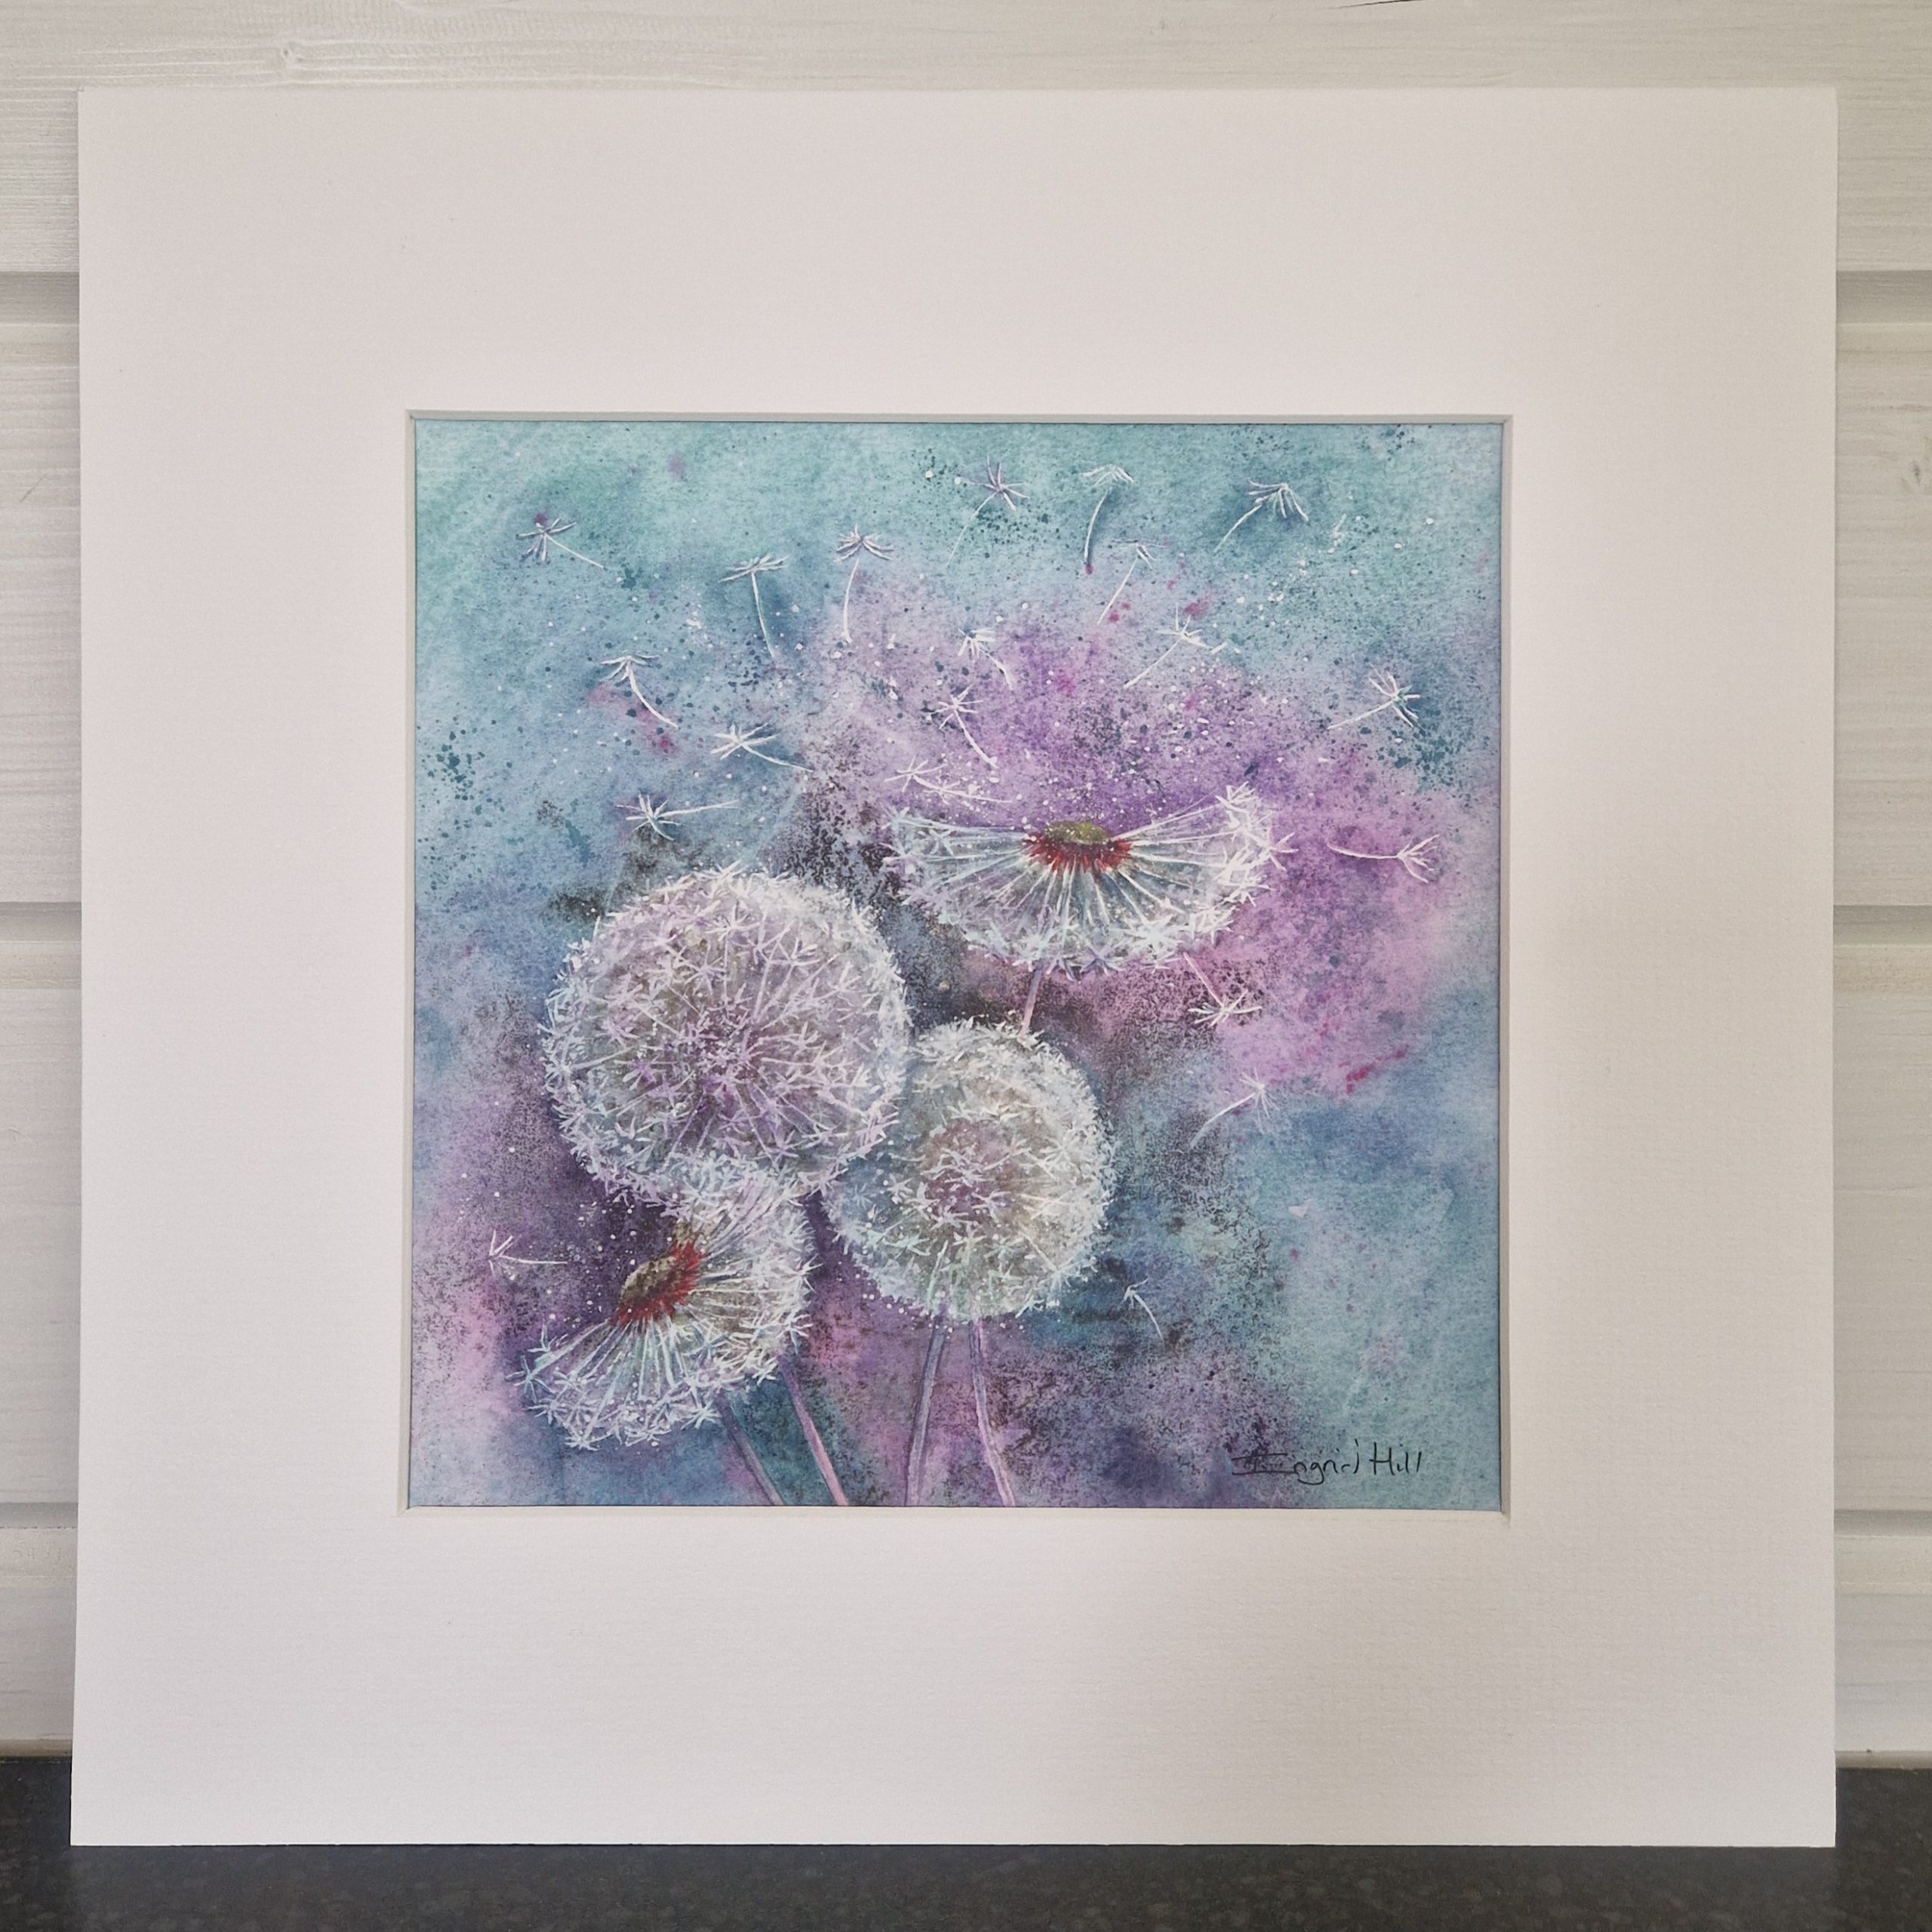 Print of a watercolour painting of dandelion seed heads